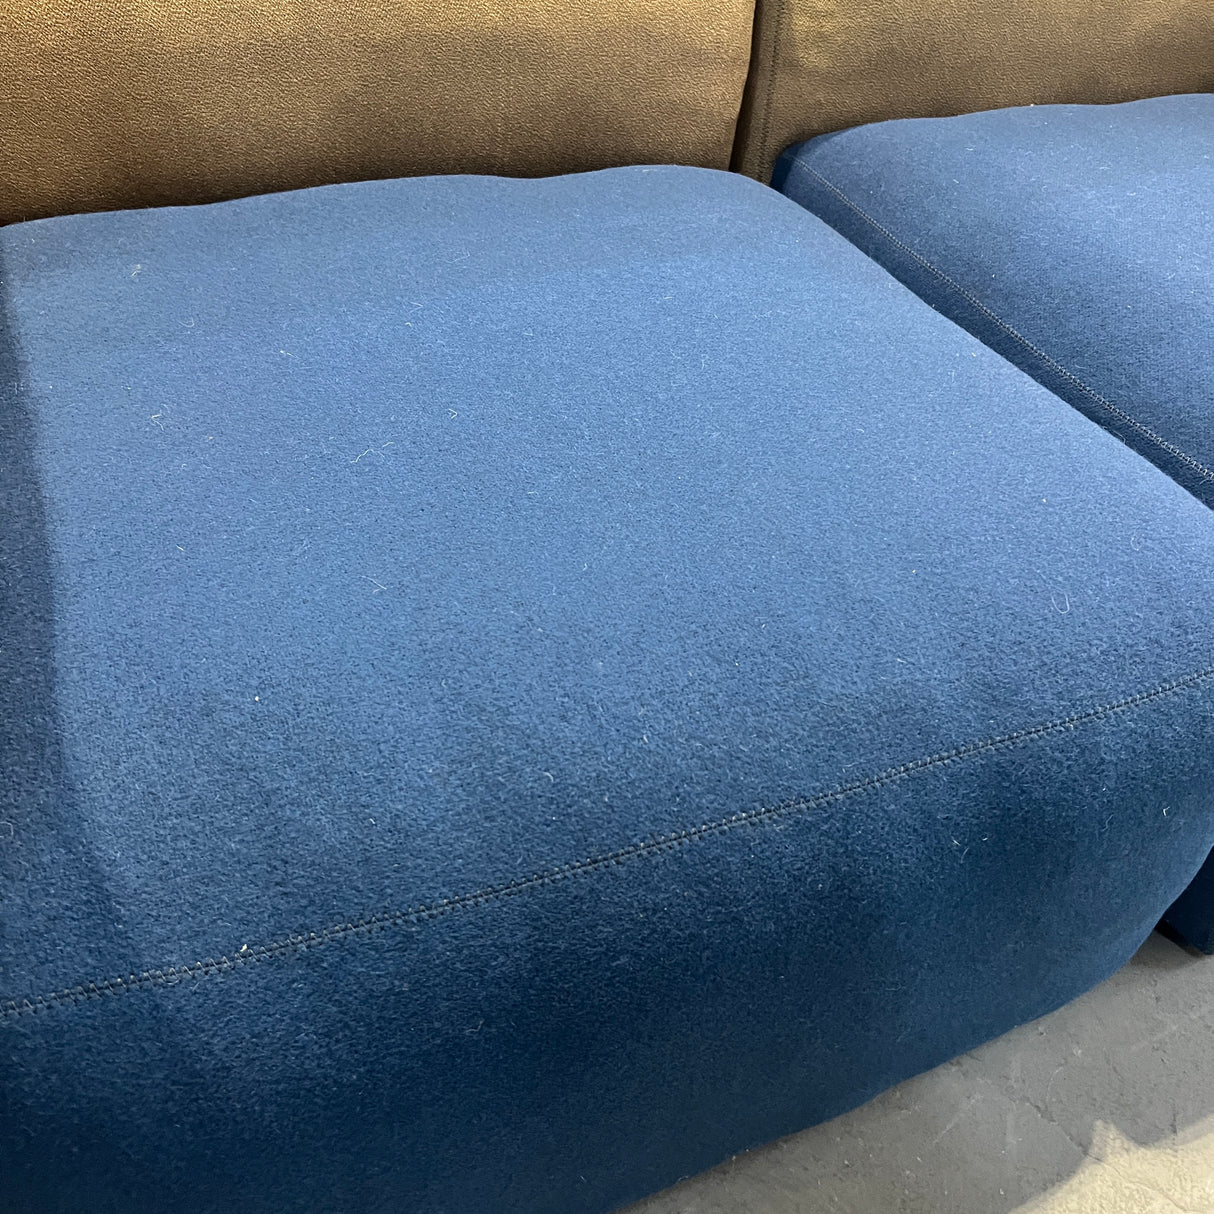 New! Hay Mags Soft LOW 2.5-SEAT SOFA